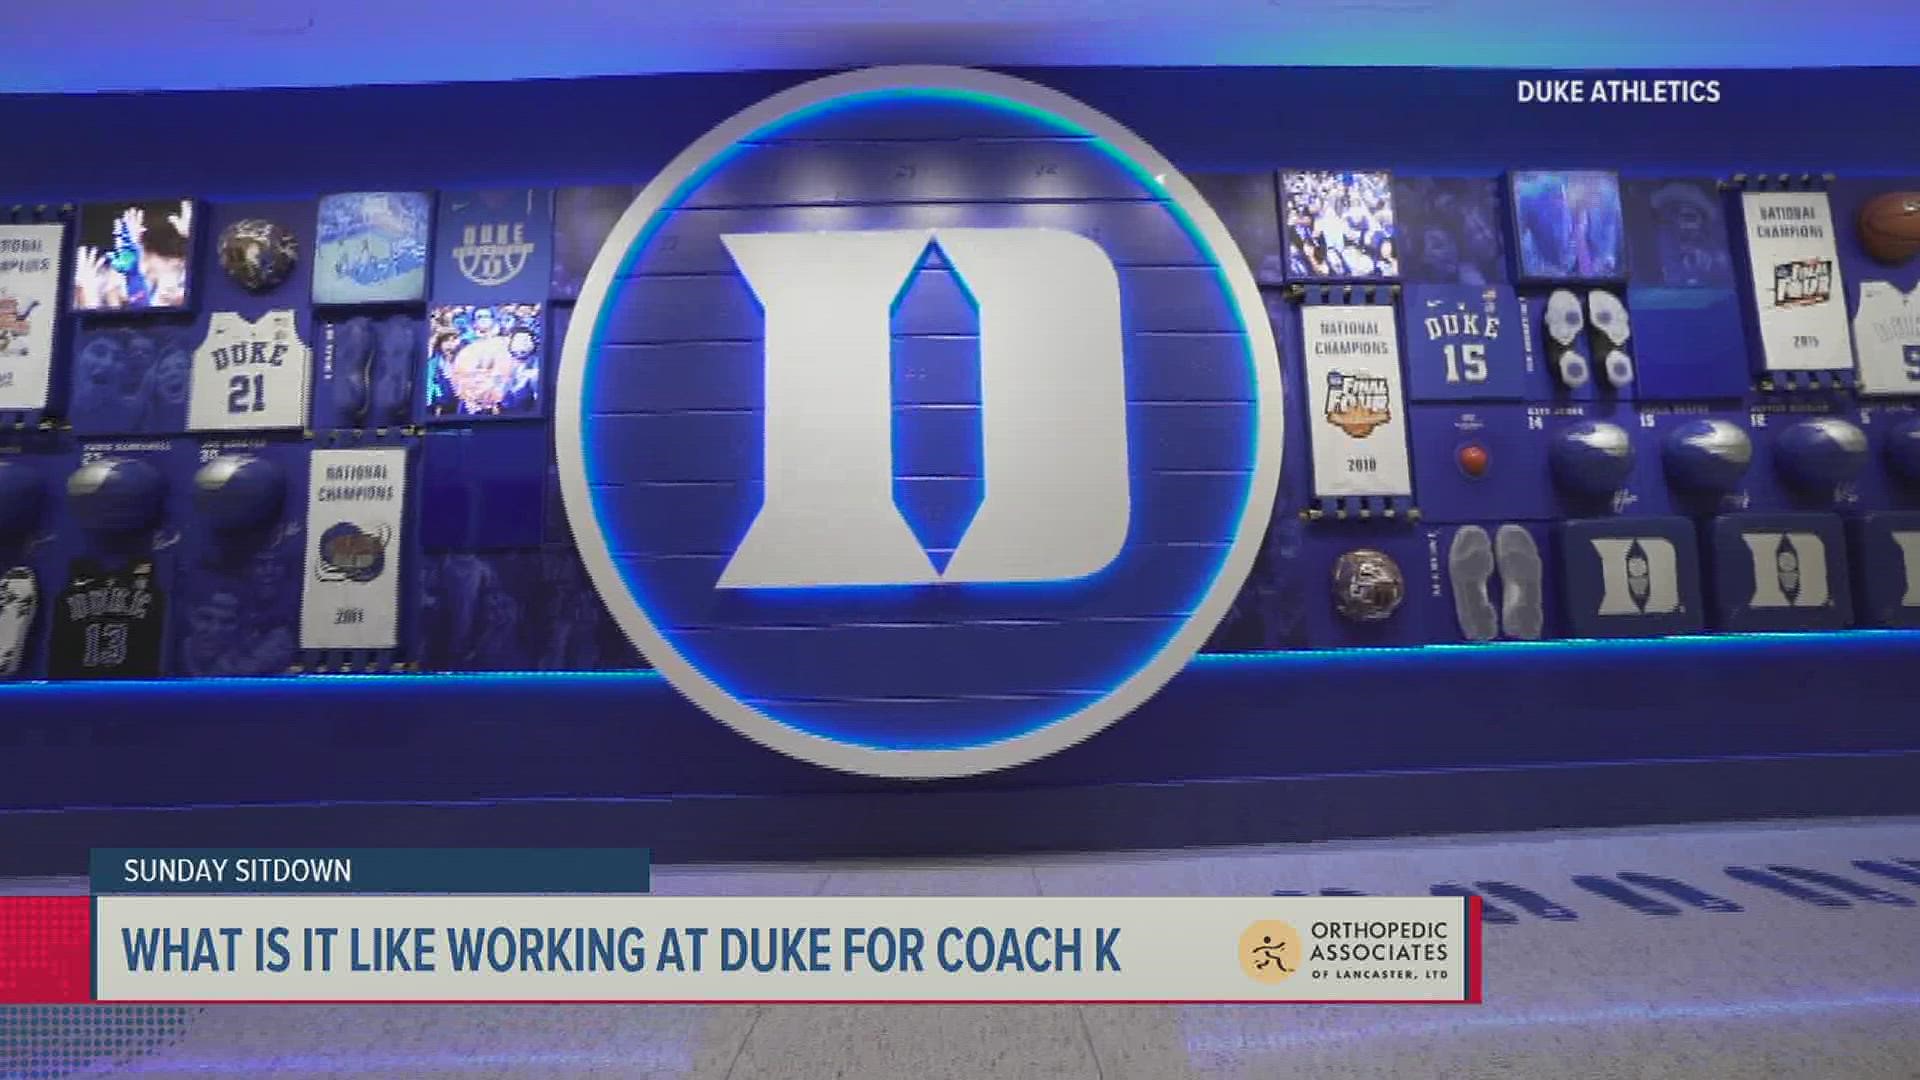 Jon Jackson has worked for Duke and with Coach K since 2000, so naturally we want to know what is it like